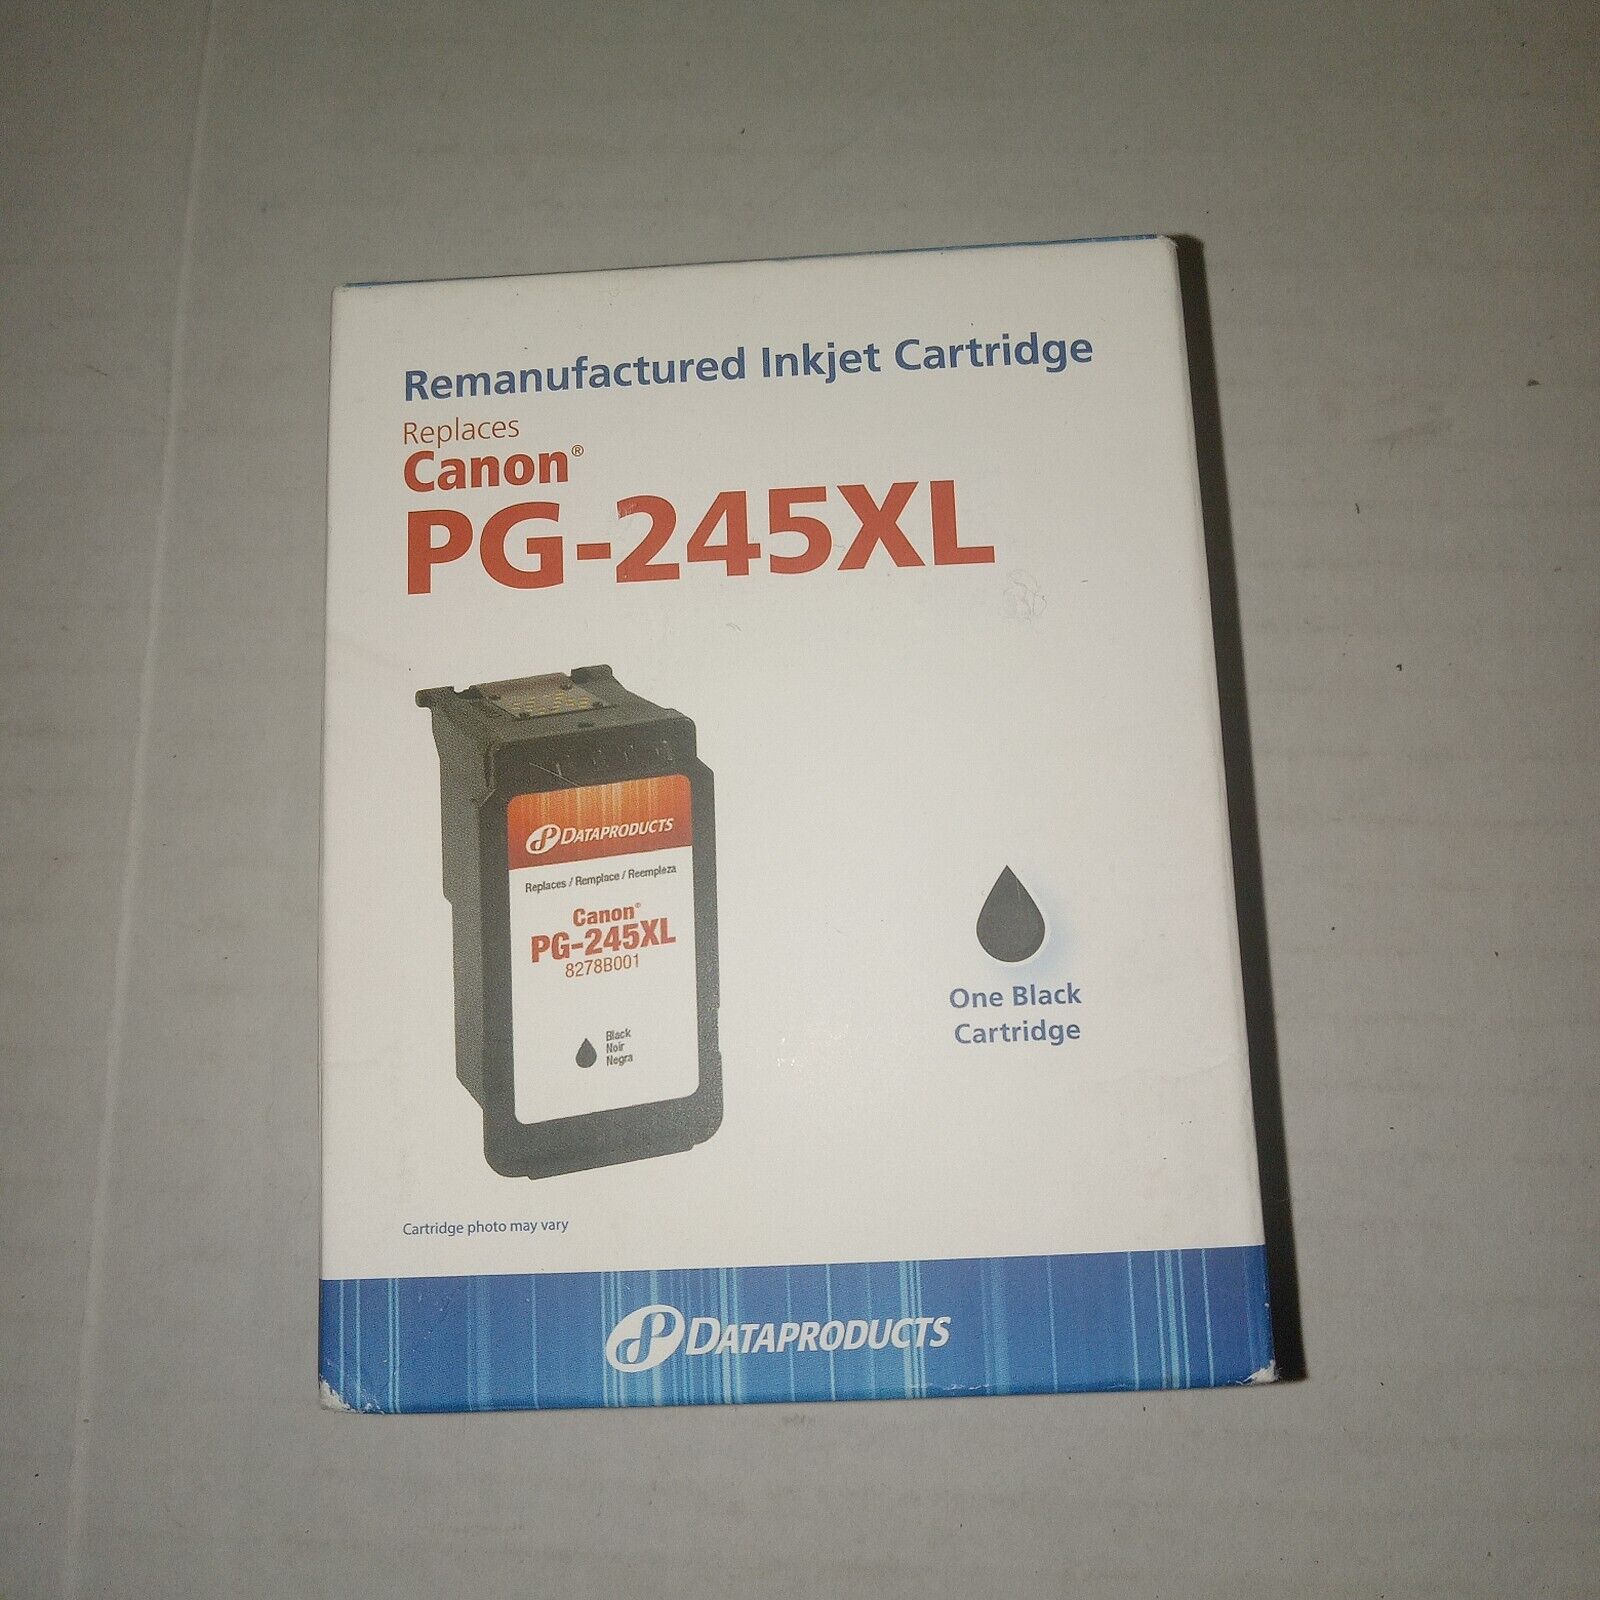 DataProducts Inkjet Cartridge BLACK Replaces Canon PG-245XL NEW